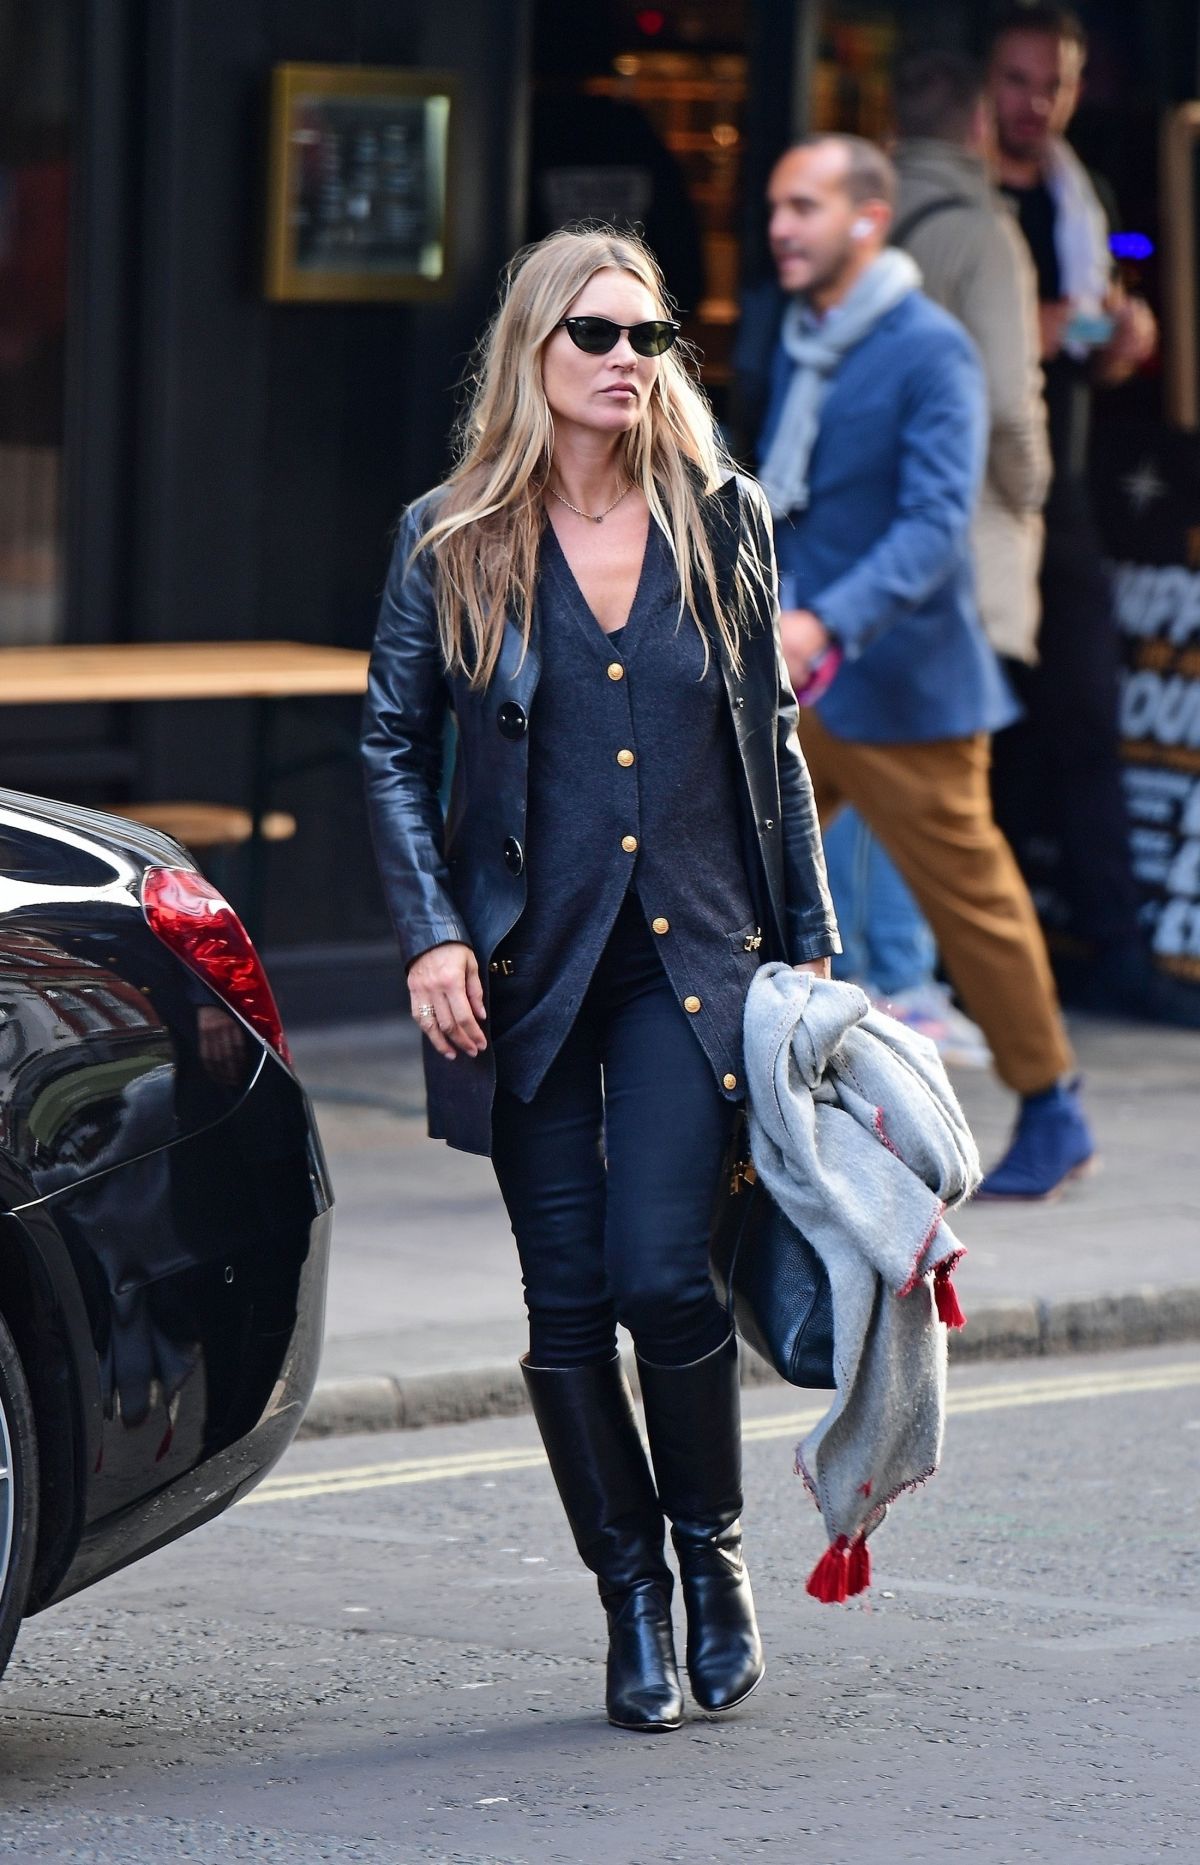 Kate Moss - posting requires reading thread rules, see post #1 | Page ...